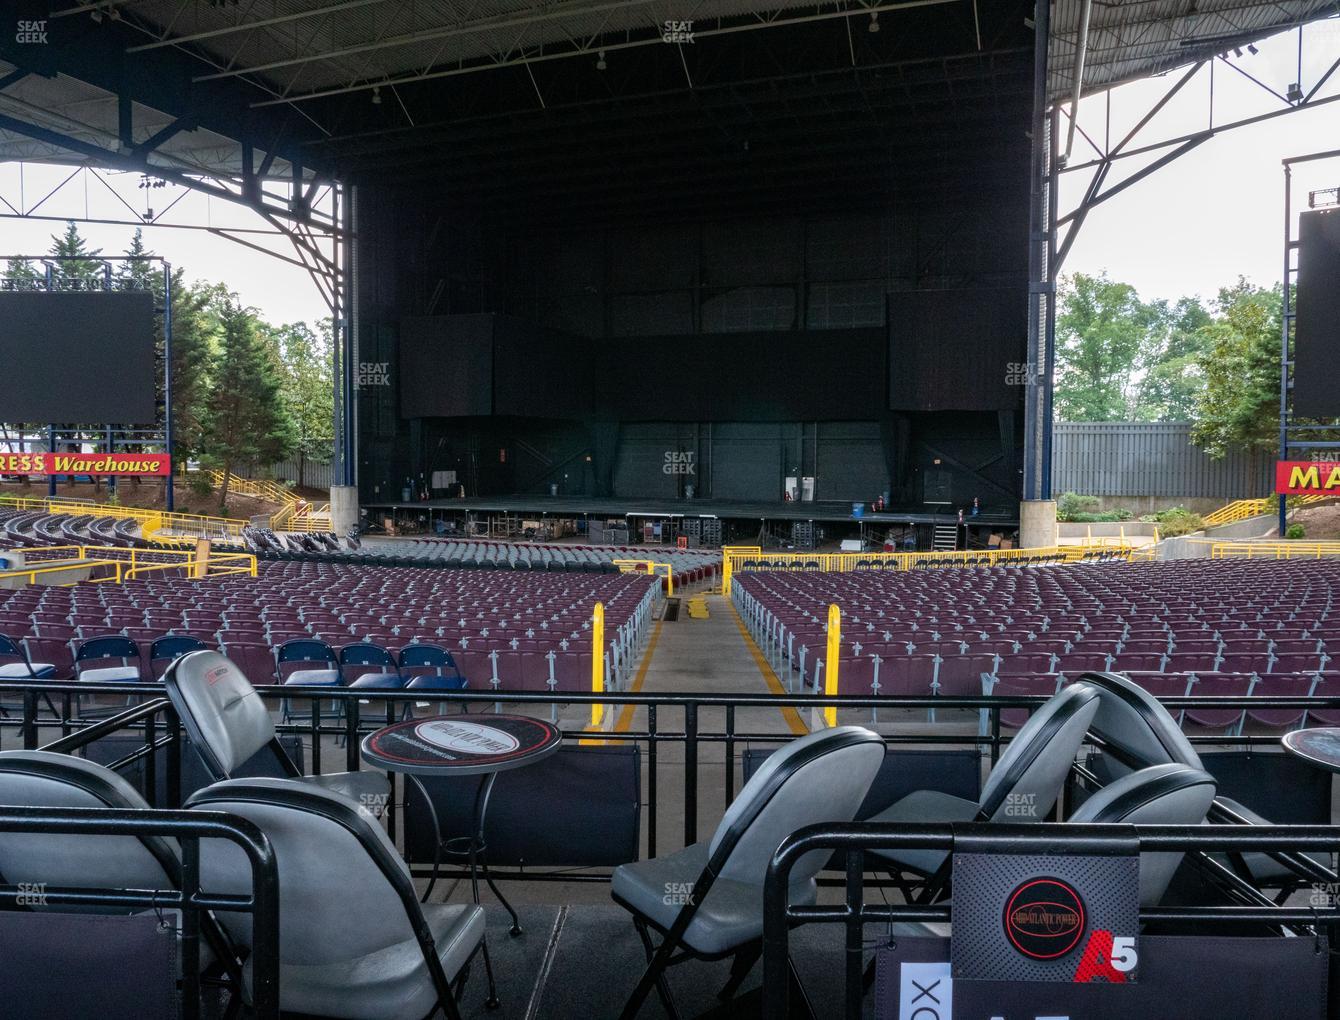 Jiffy Lube Live Seating Plan Awesome Home